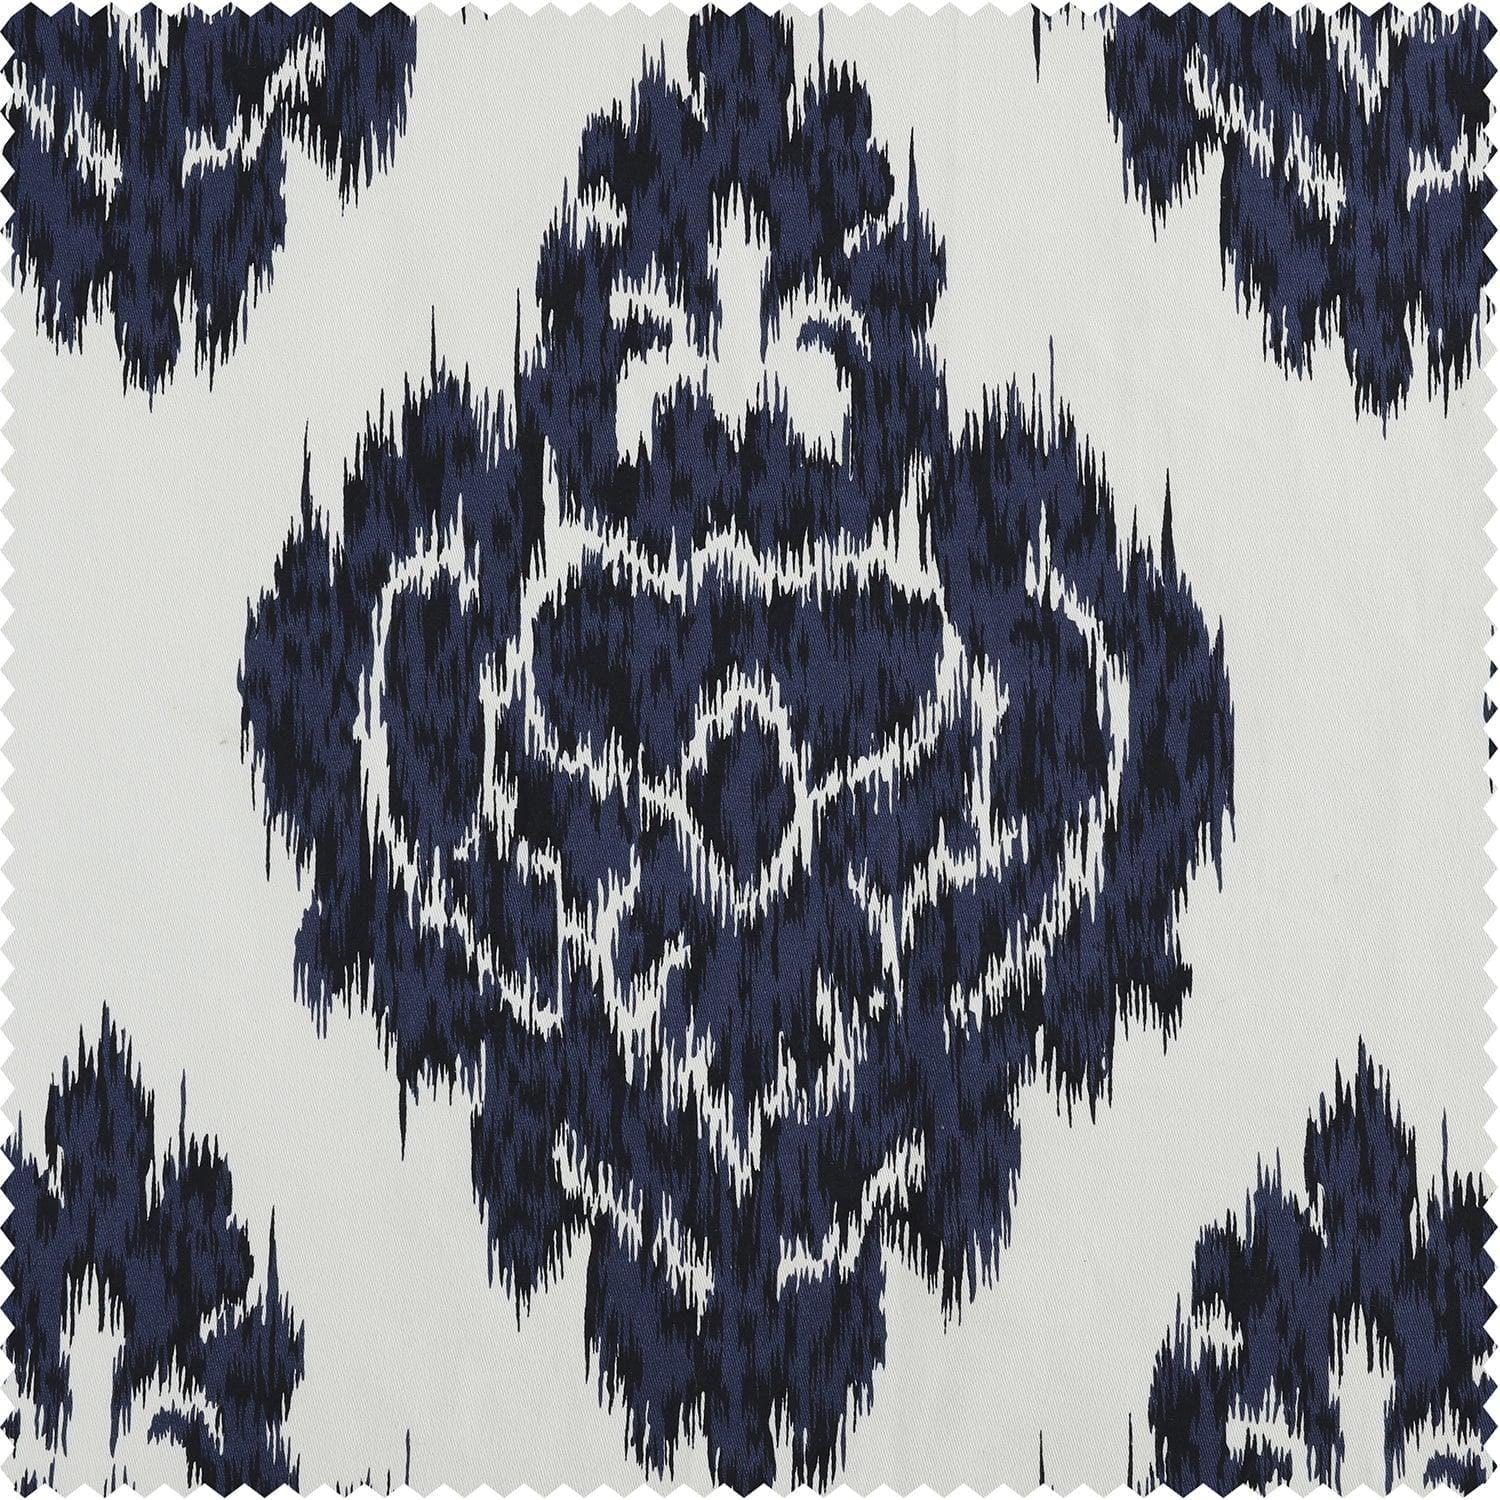 Ikat Blue French Pleat Printed Cotton Curtain